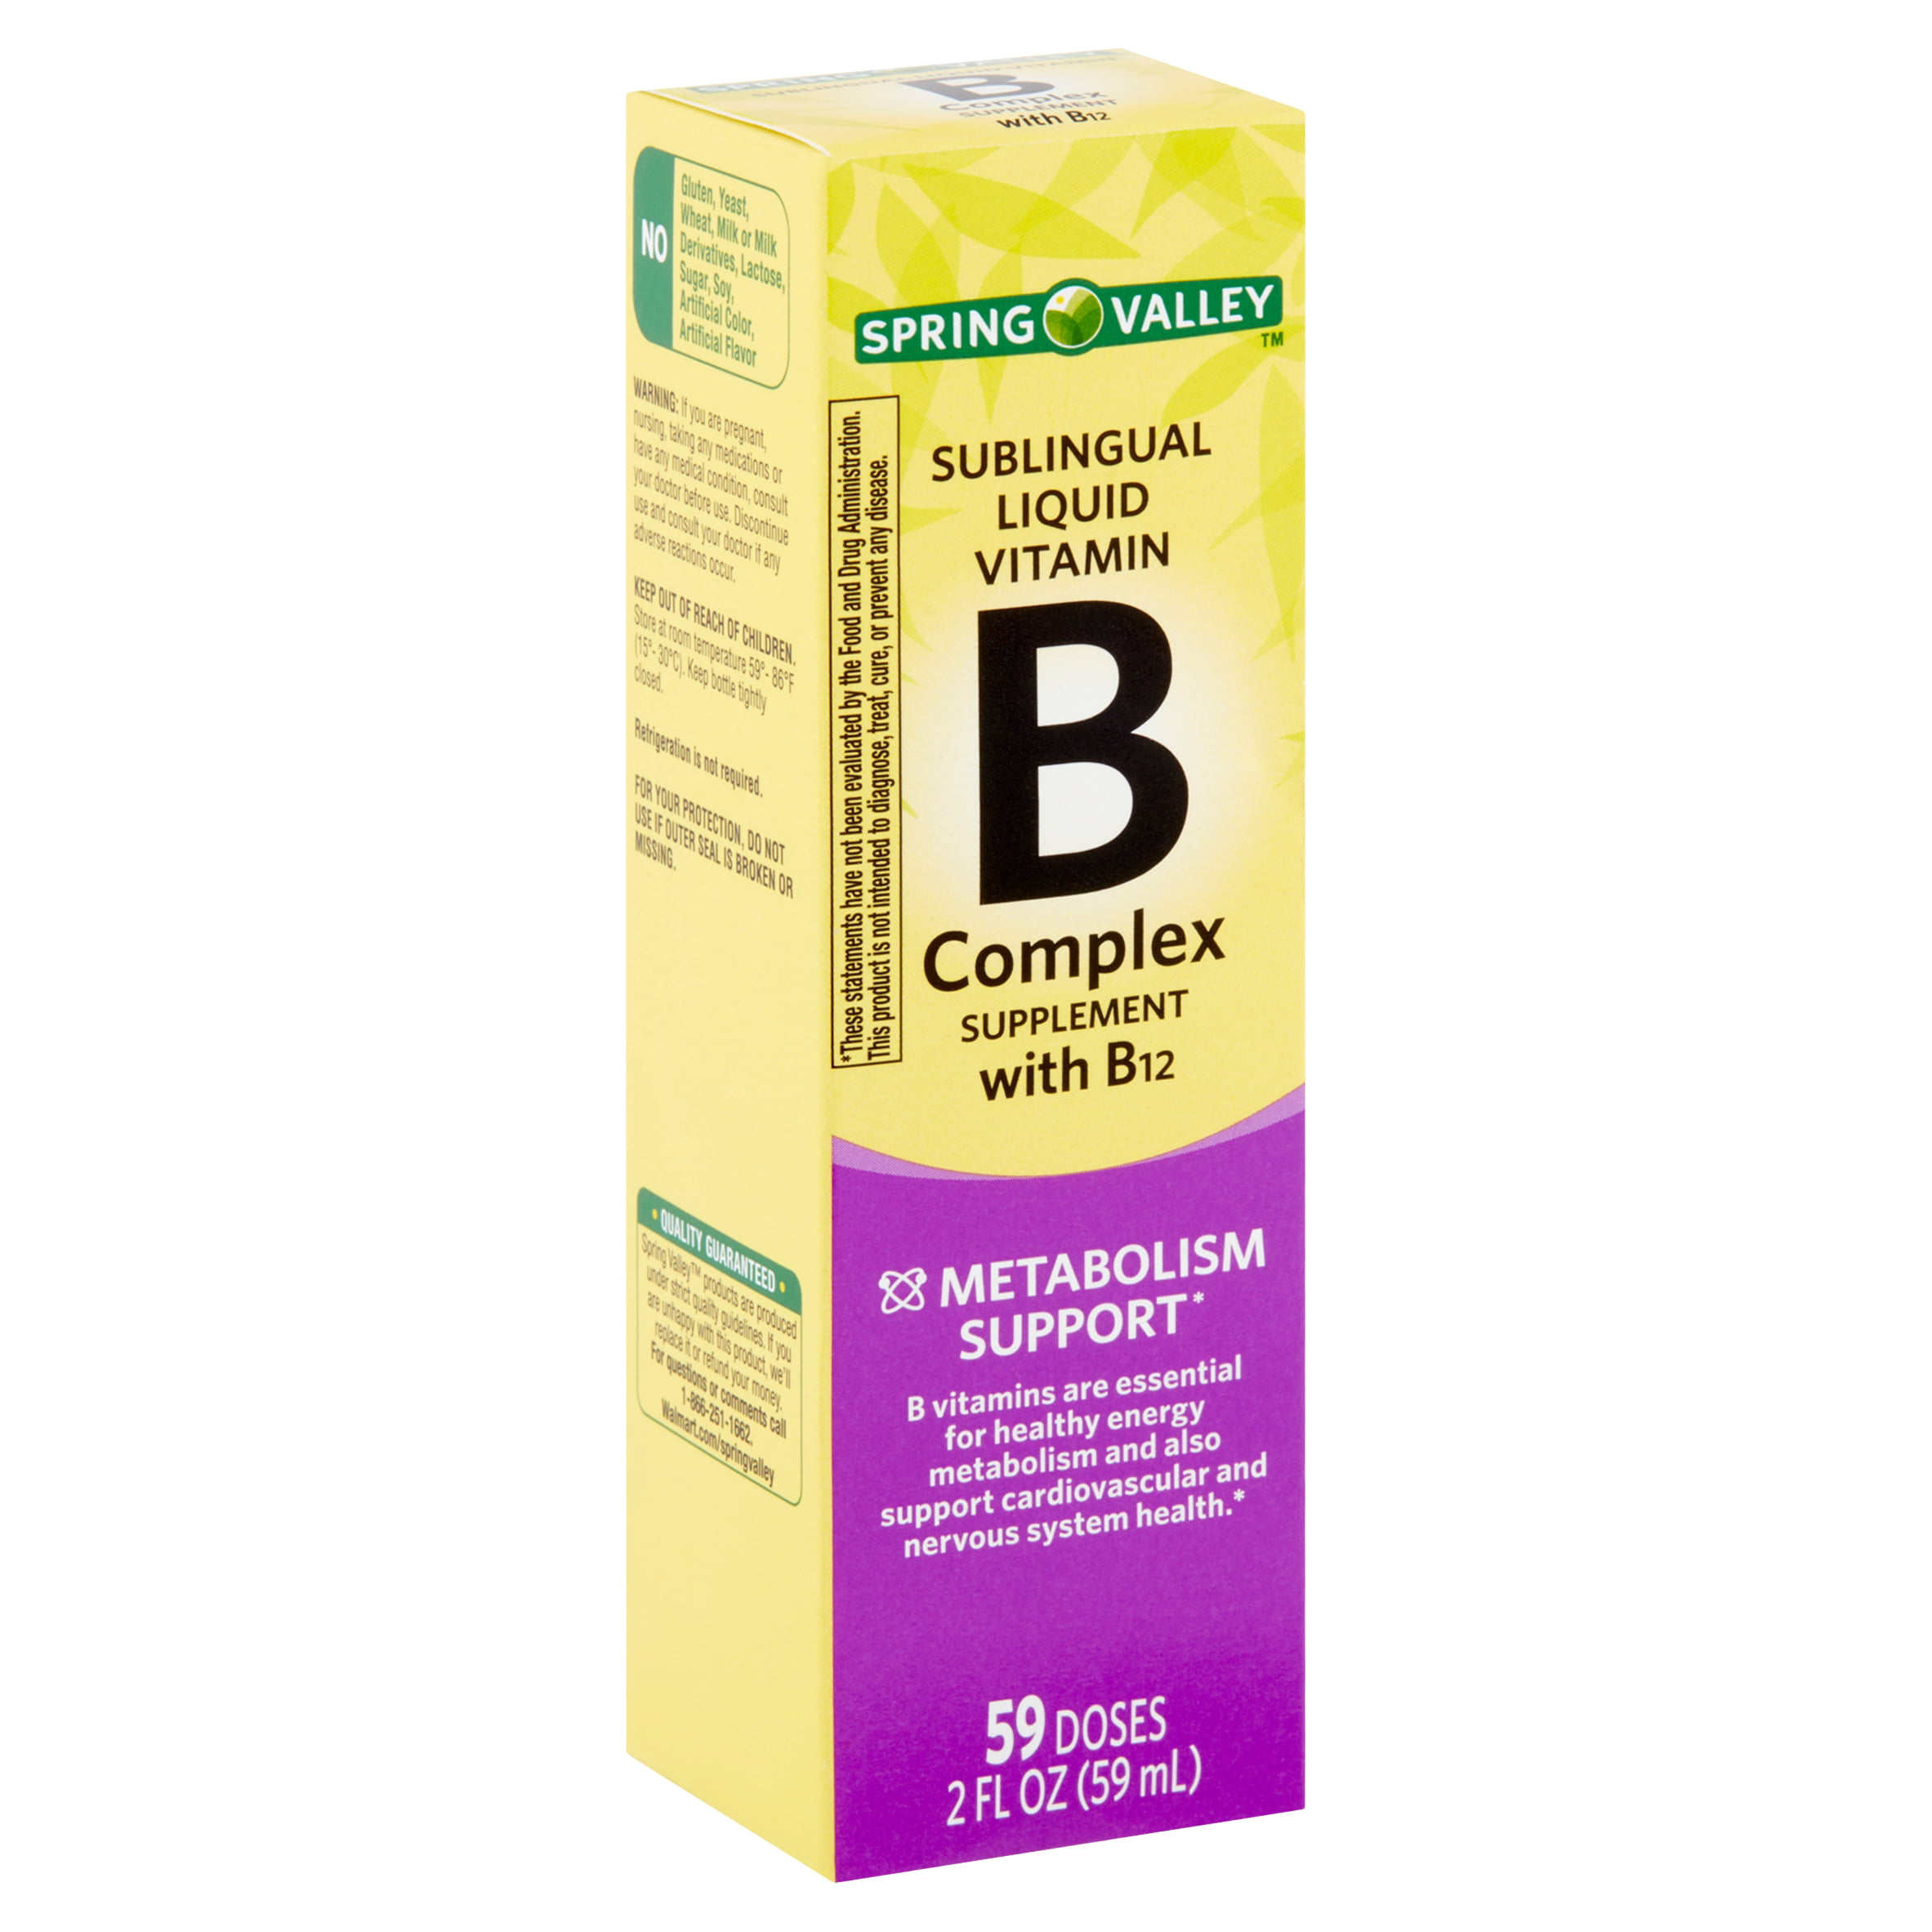 Spring Valley Vitamin B Complex Supplement with B12 ...